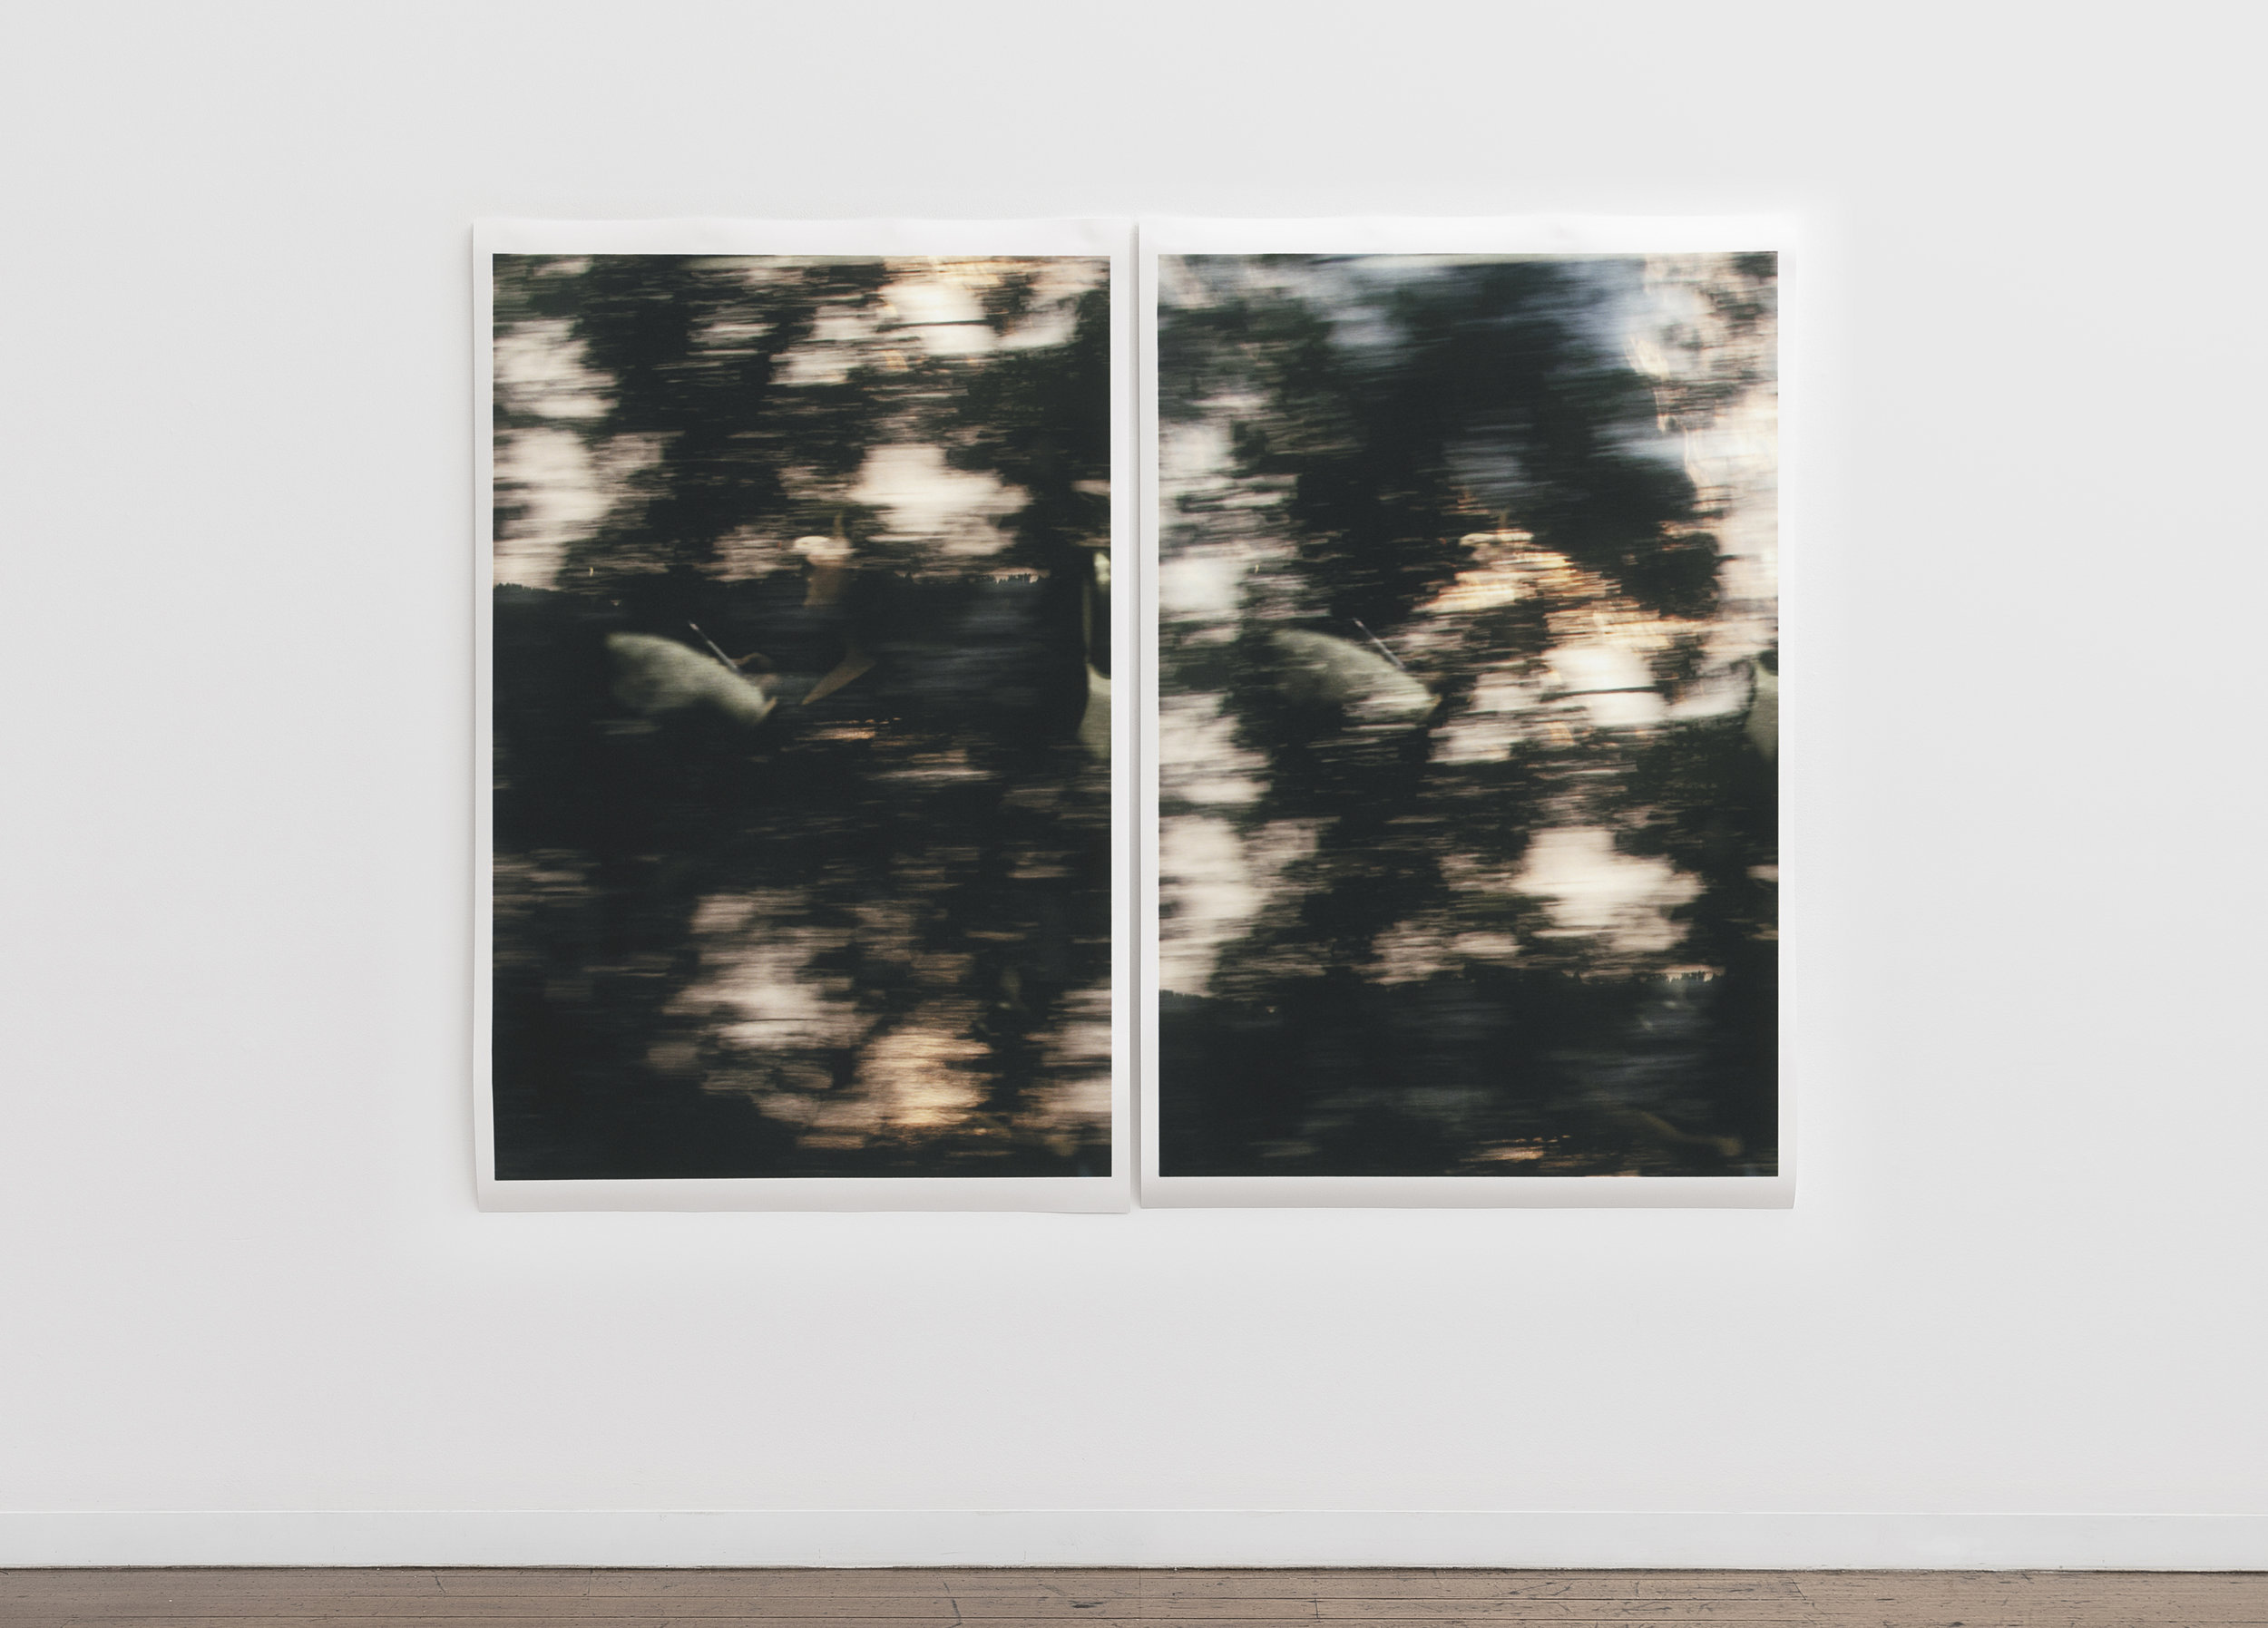   Untitled (figure, glass, landscape / consecutive) , pigment print on paper, diptych, sheet: 168 × 110 cm (66 1/8 × 43 1/4 in), each, framed: 178.9 × 120.2 cm (70 1/2 × 47 3/8 in), each, 178.9 × 240.4 cm (70 1/2 × 94 3/4 in), overall, 2019  Installa